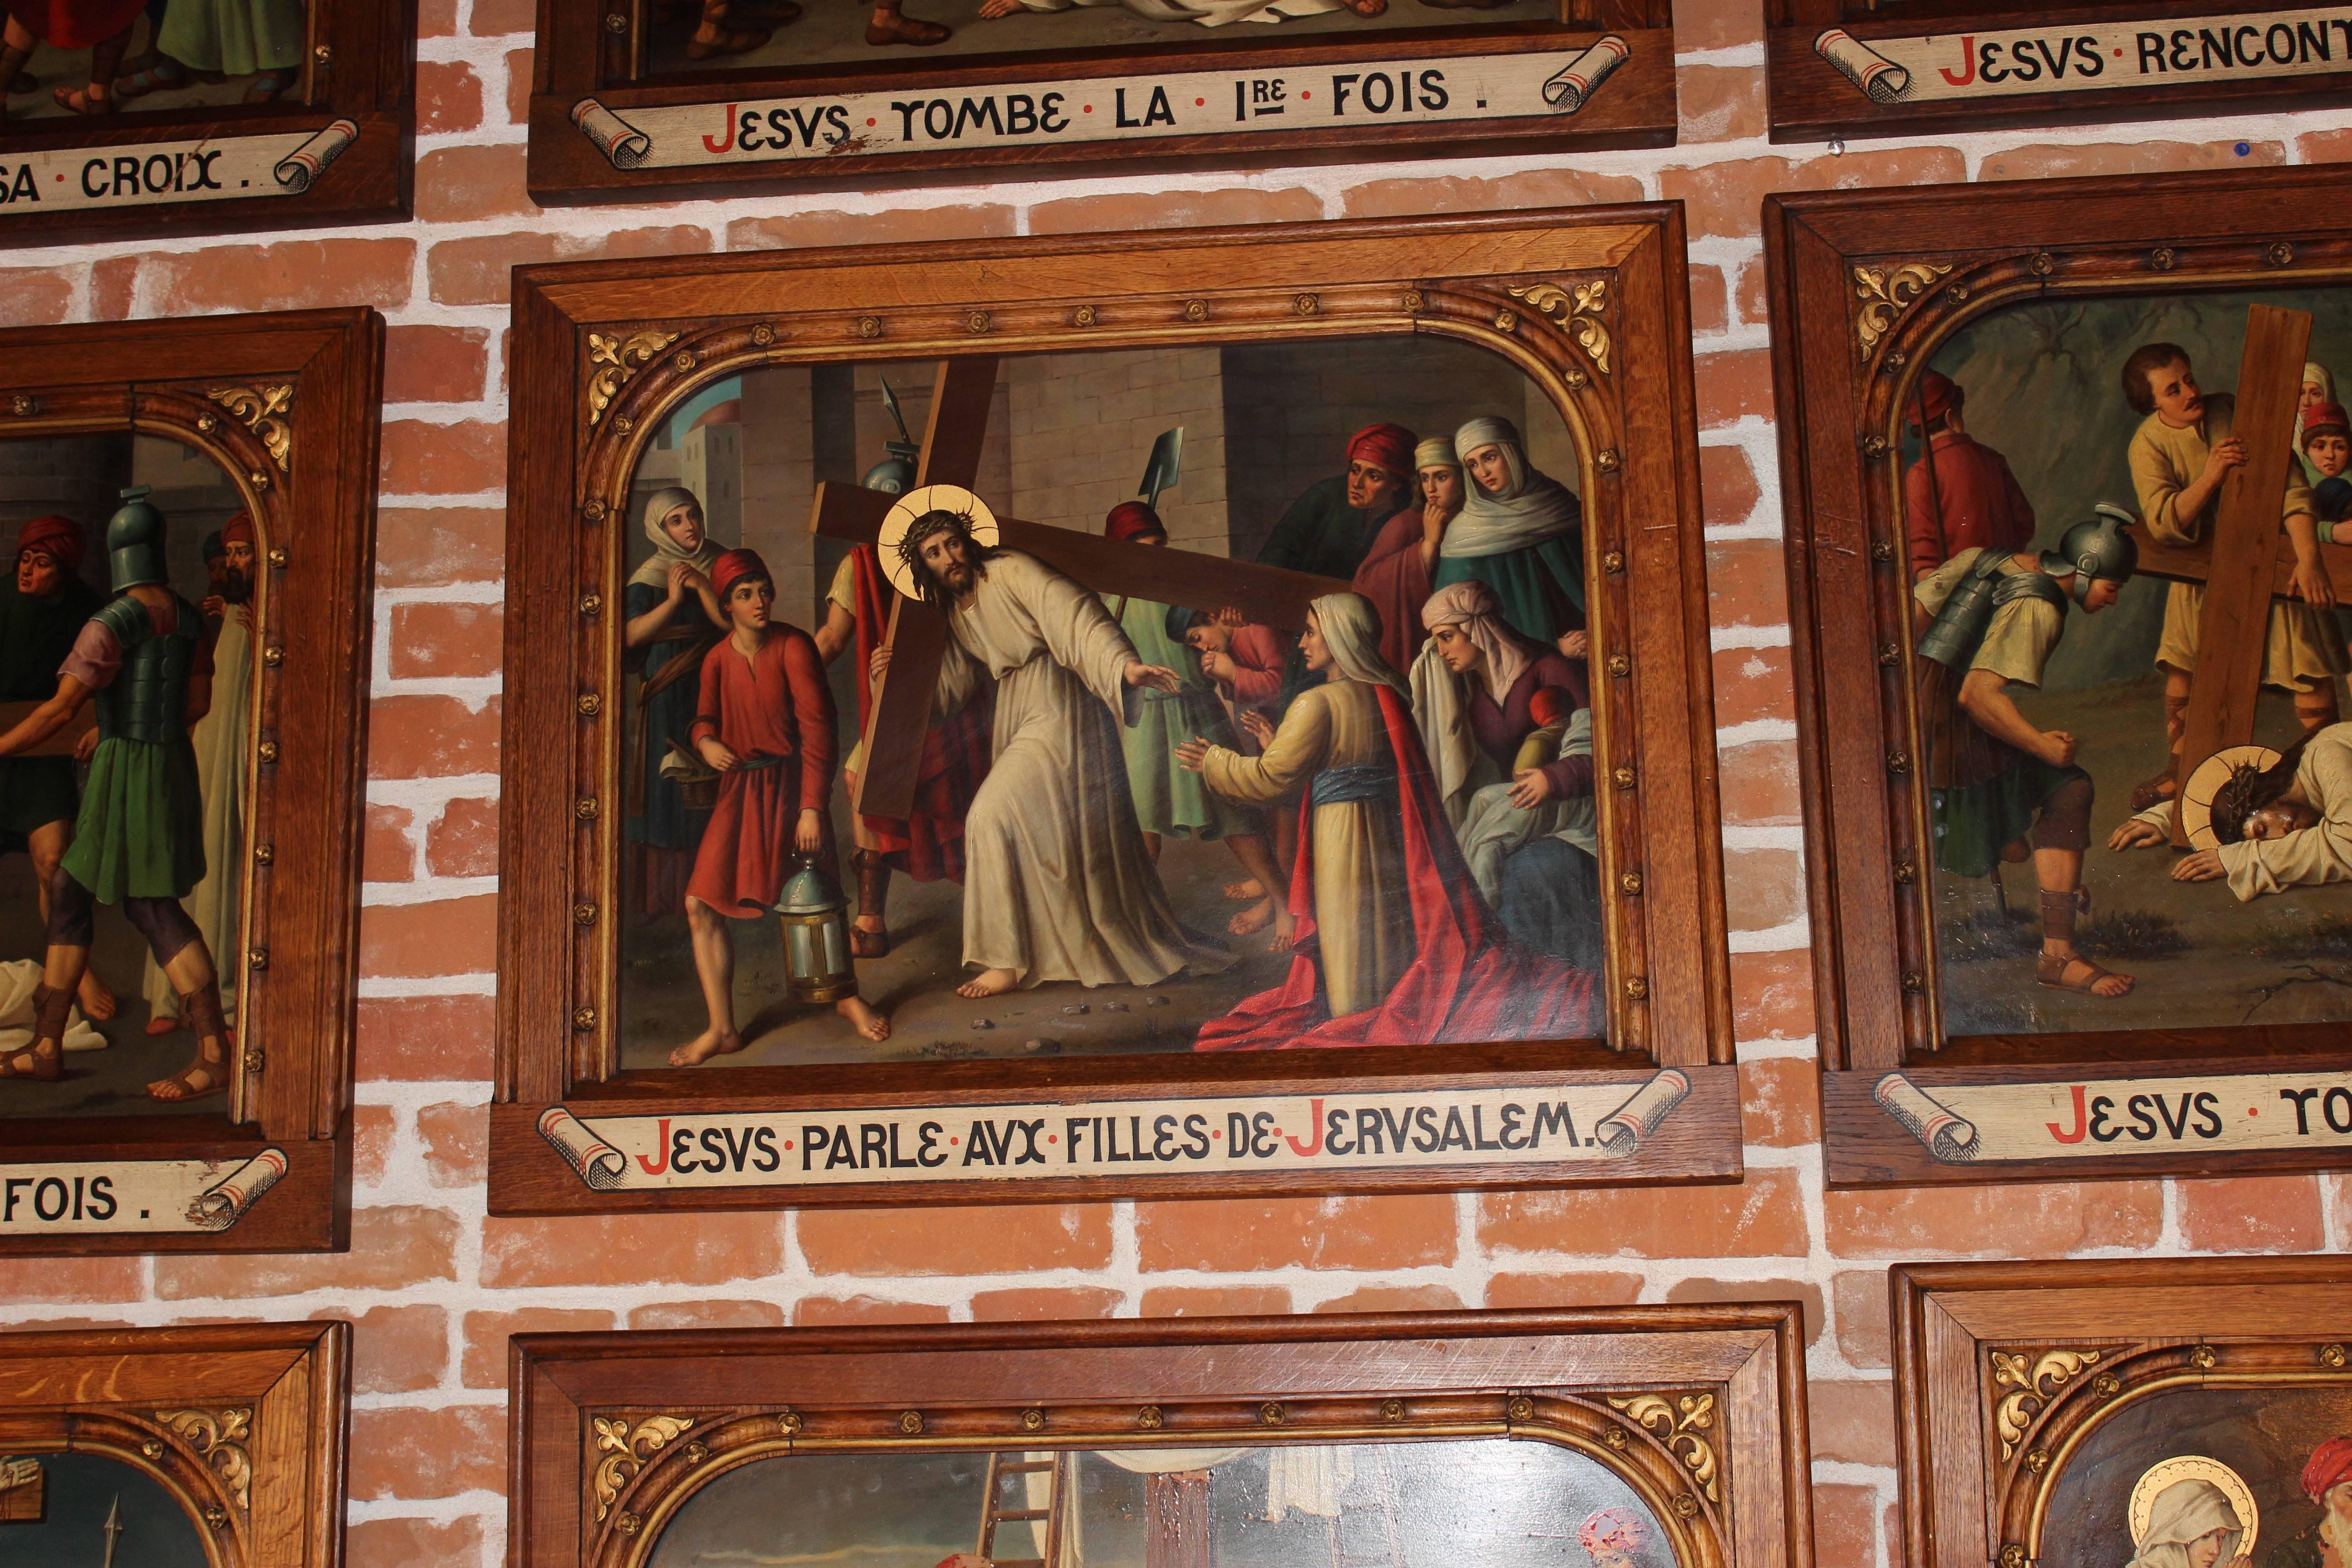 stations of the cross in french